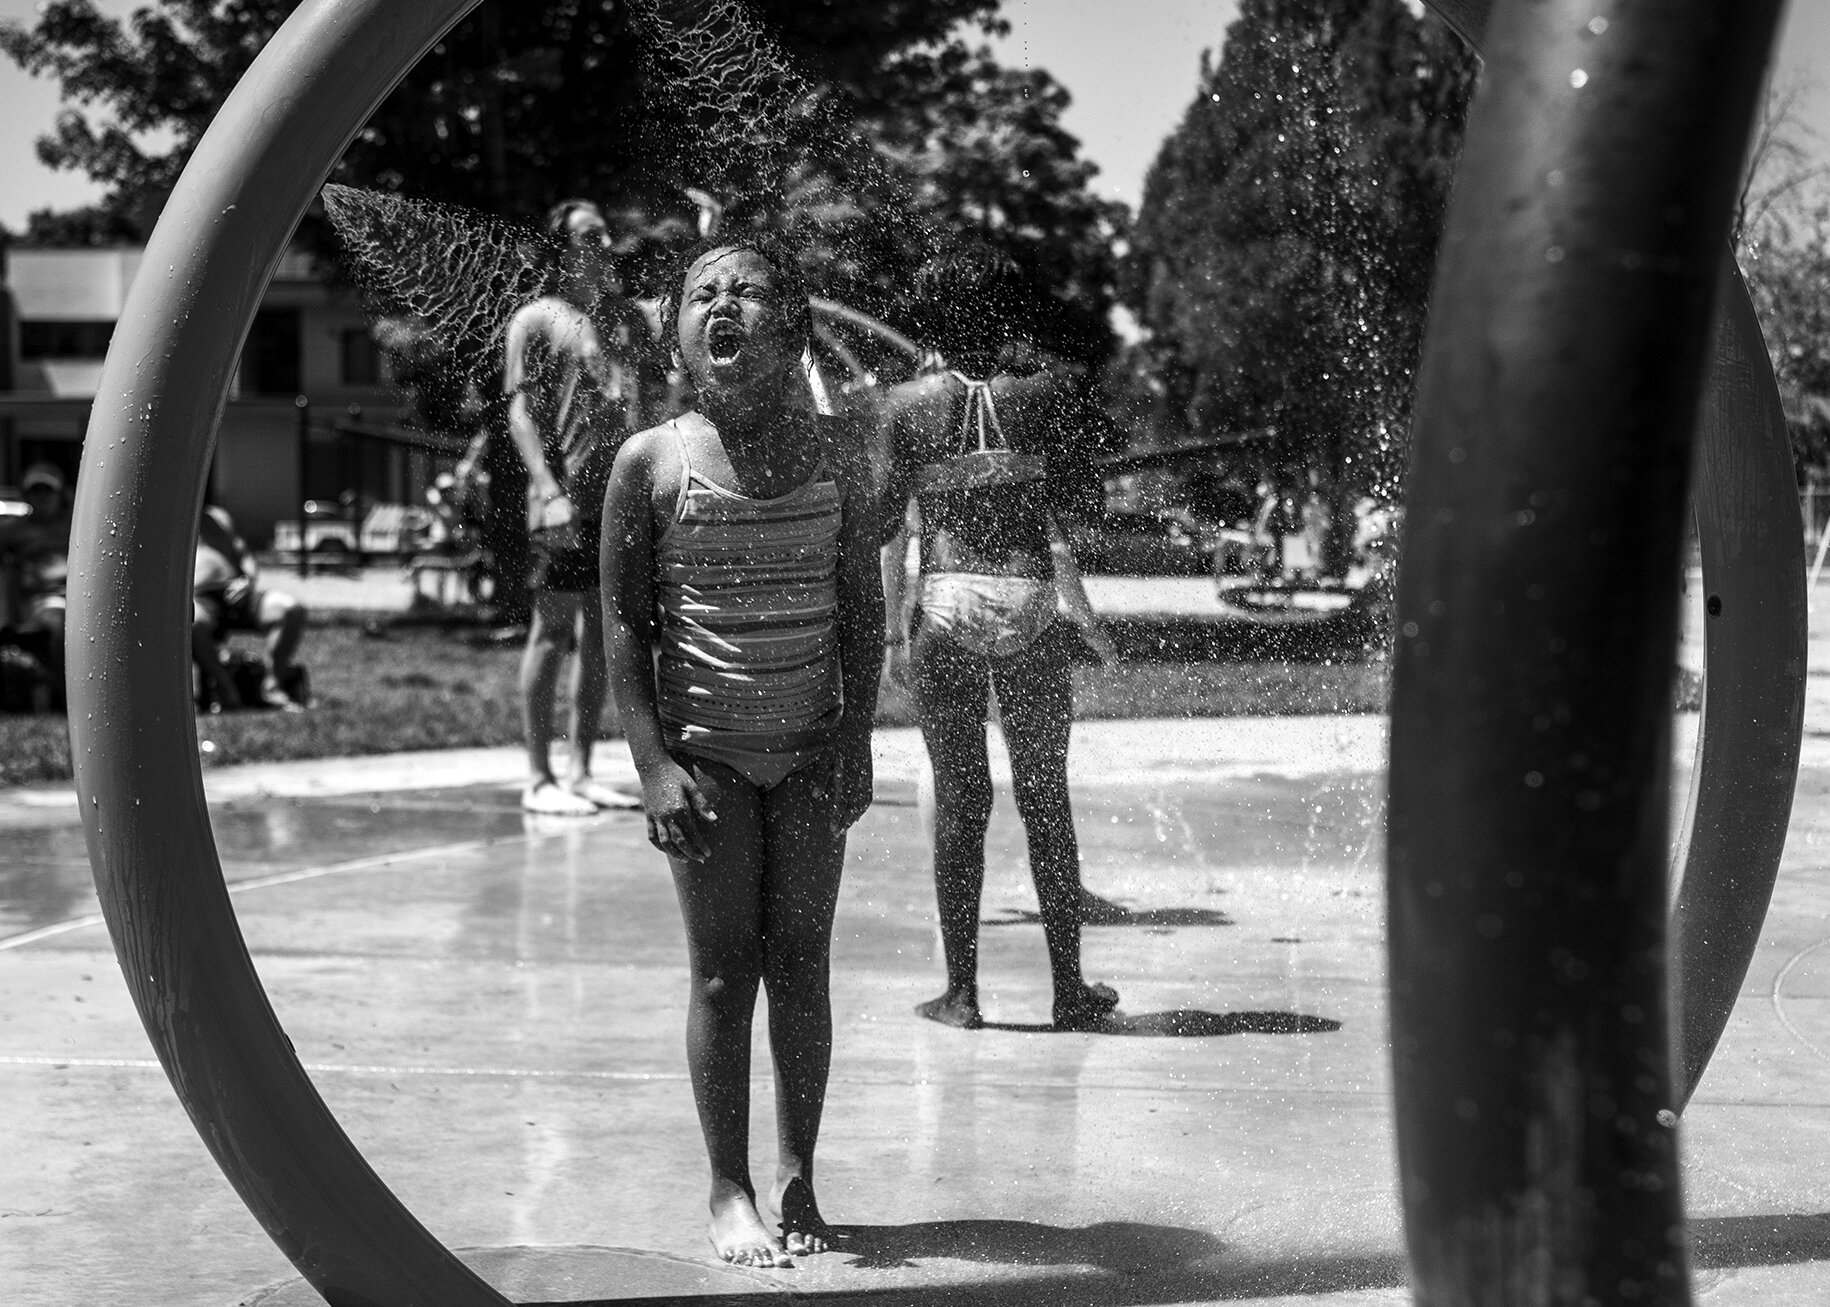  Children cool off in a splash pad at Bonner Park in Missoula in June 2020 as temperatures soar into the low 100s.  